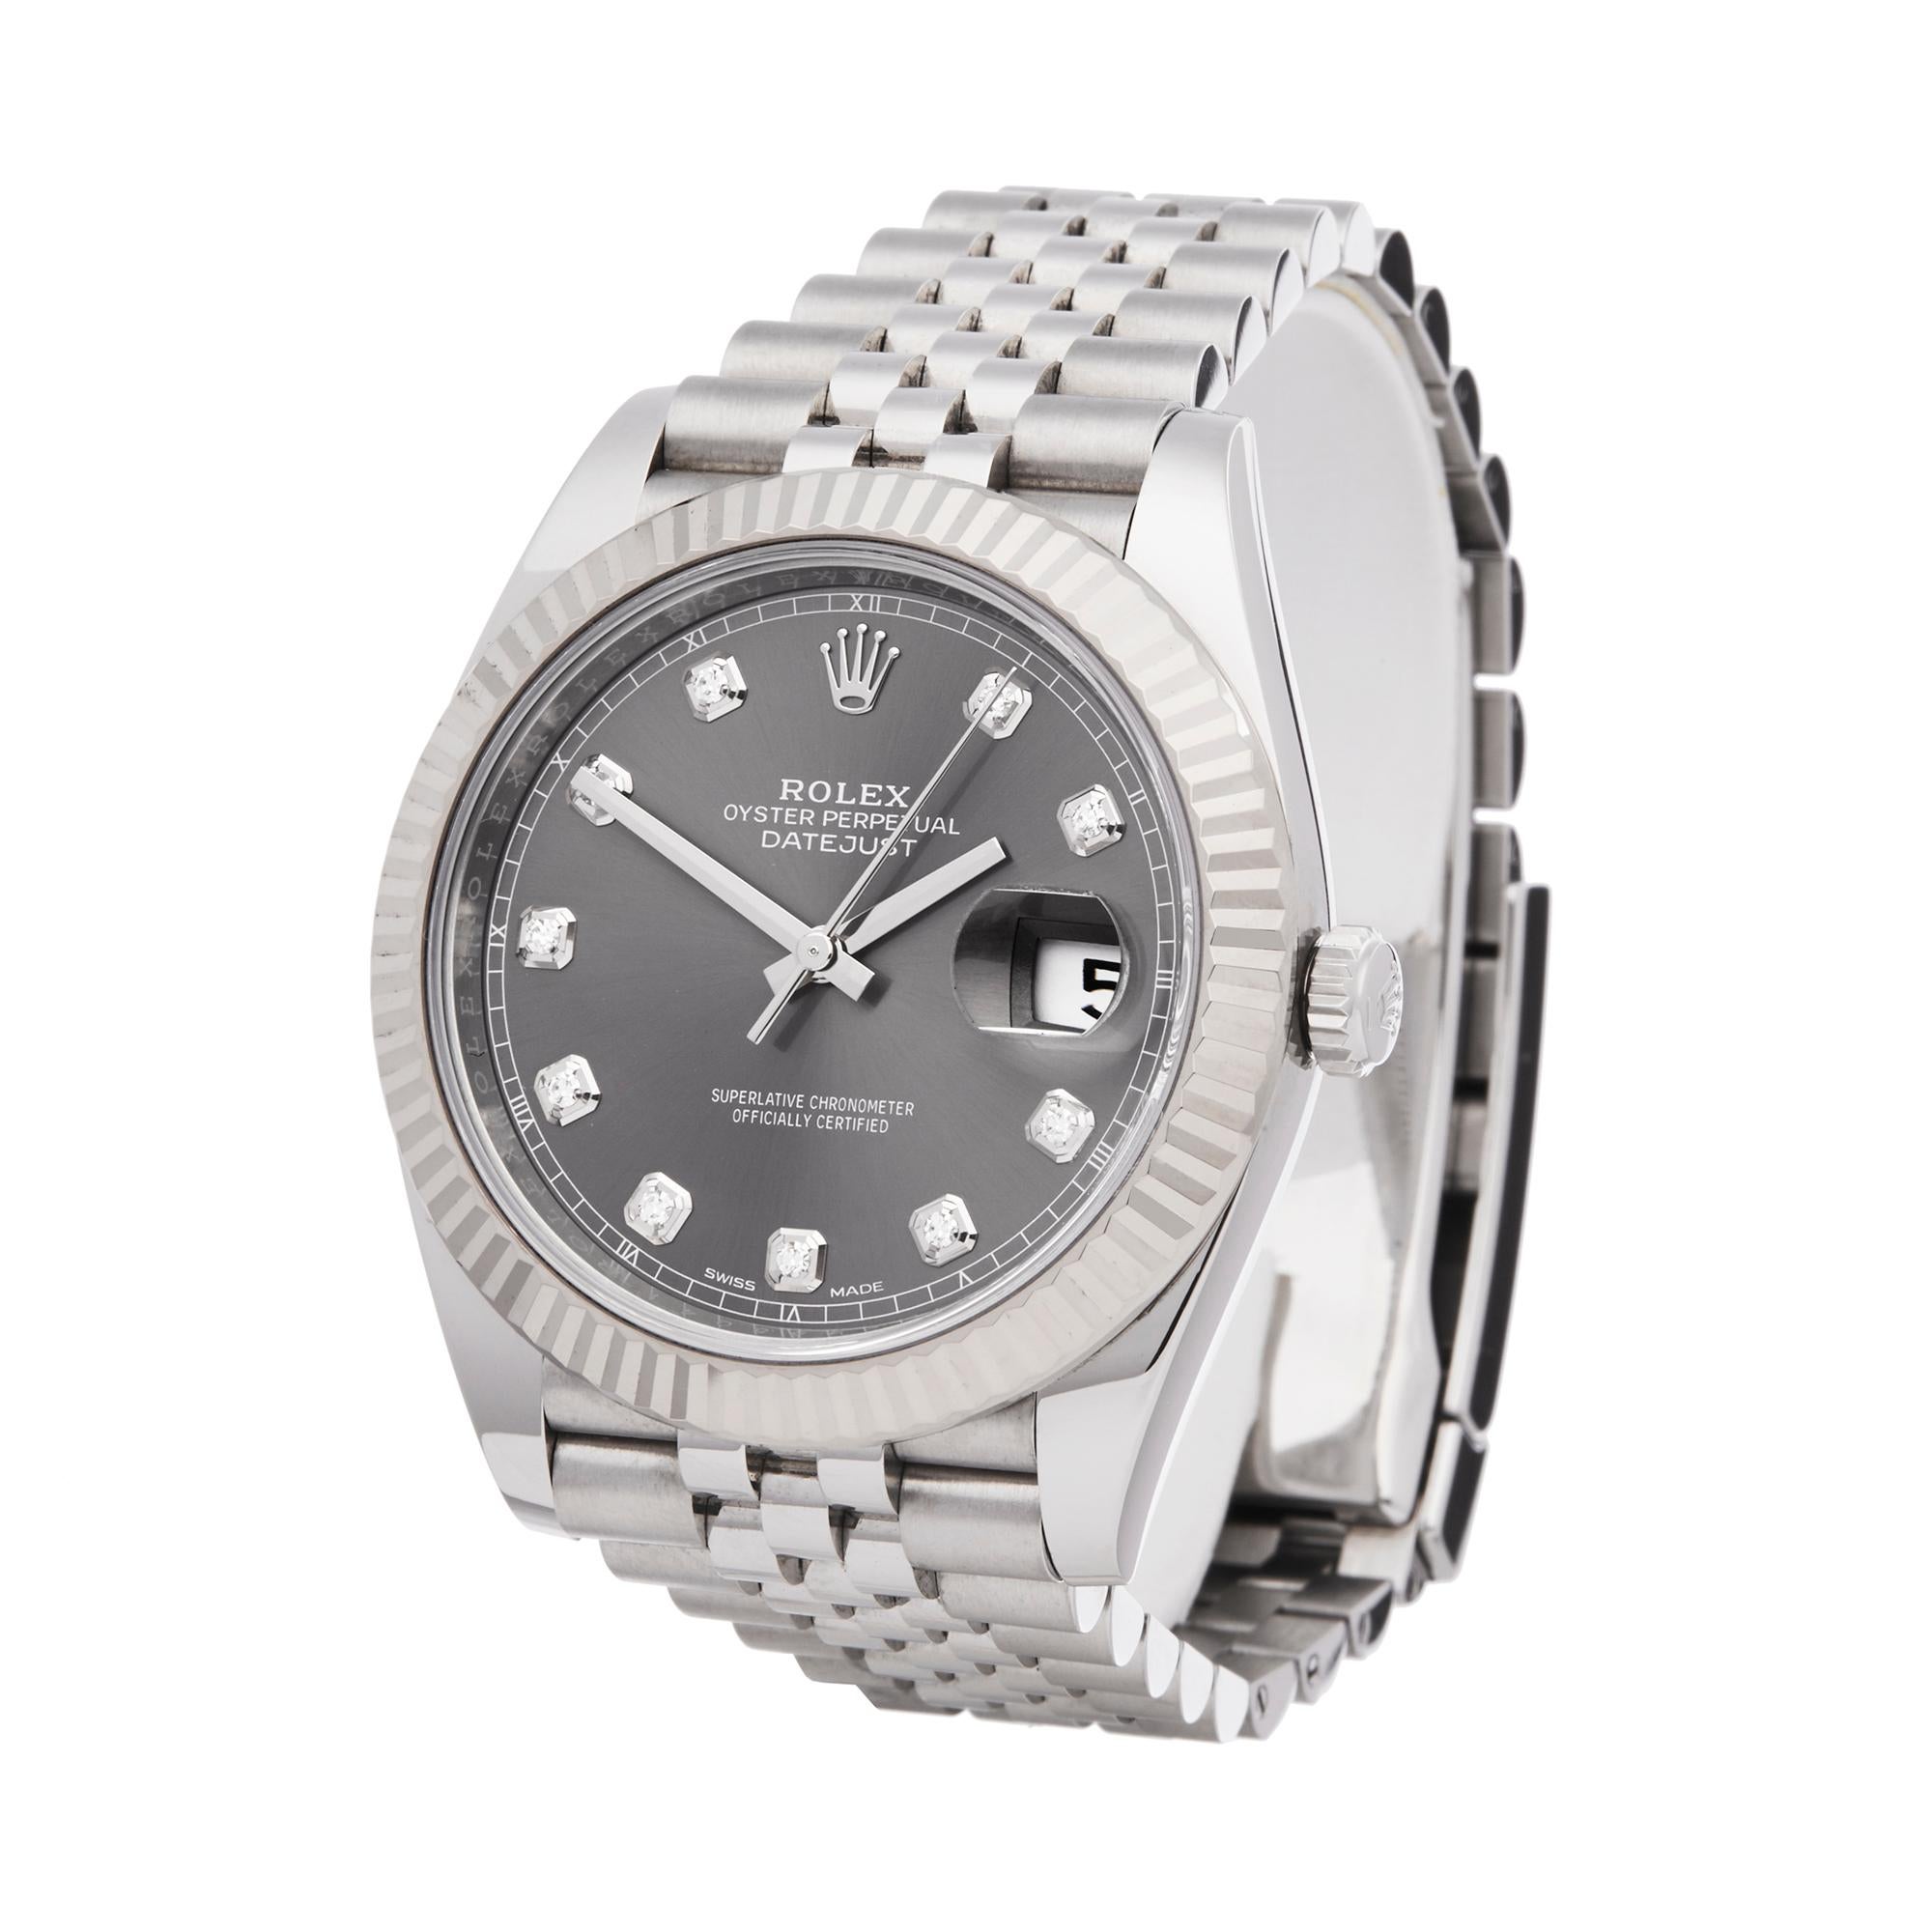 Ref: W5790
Manufacturer: Rolex
Model: Datejust
Model Ref: 126334
Age: 8th January 2018
Gender: Mens
Complete With: Box & Guarantee
Dial: Grey with Diamonds
Glass: Sapphire Crystal
Movement: Automatic
Water Resistance: To Manufacturers